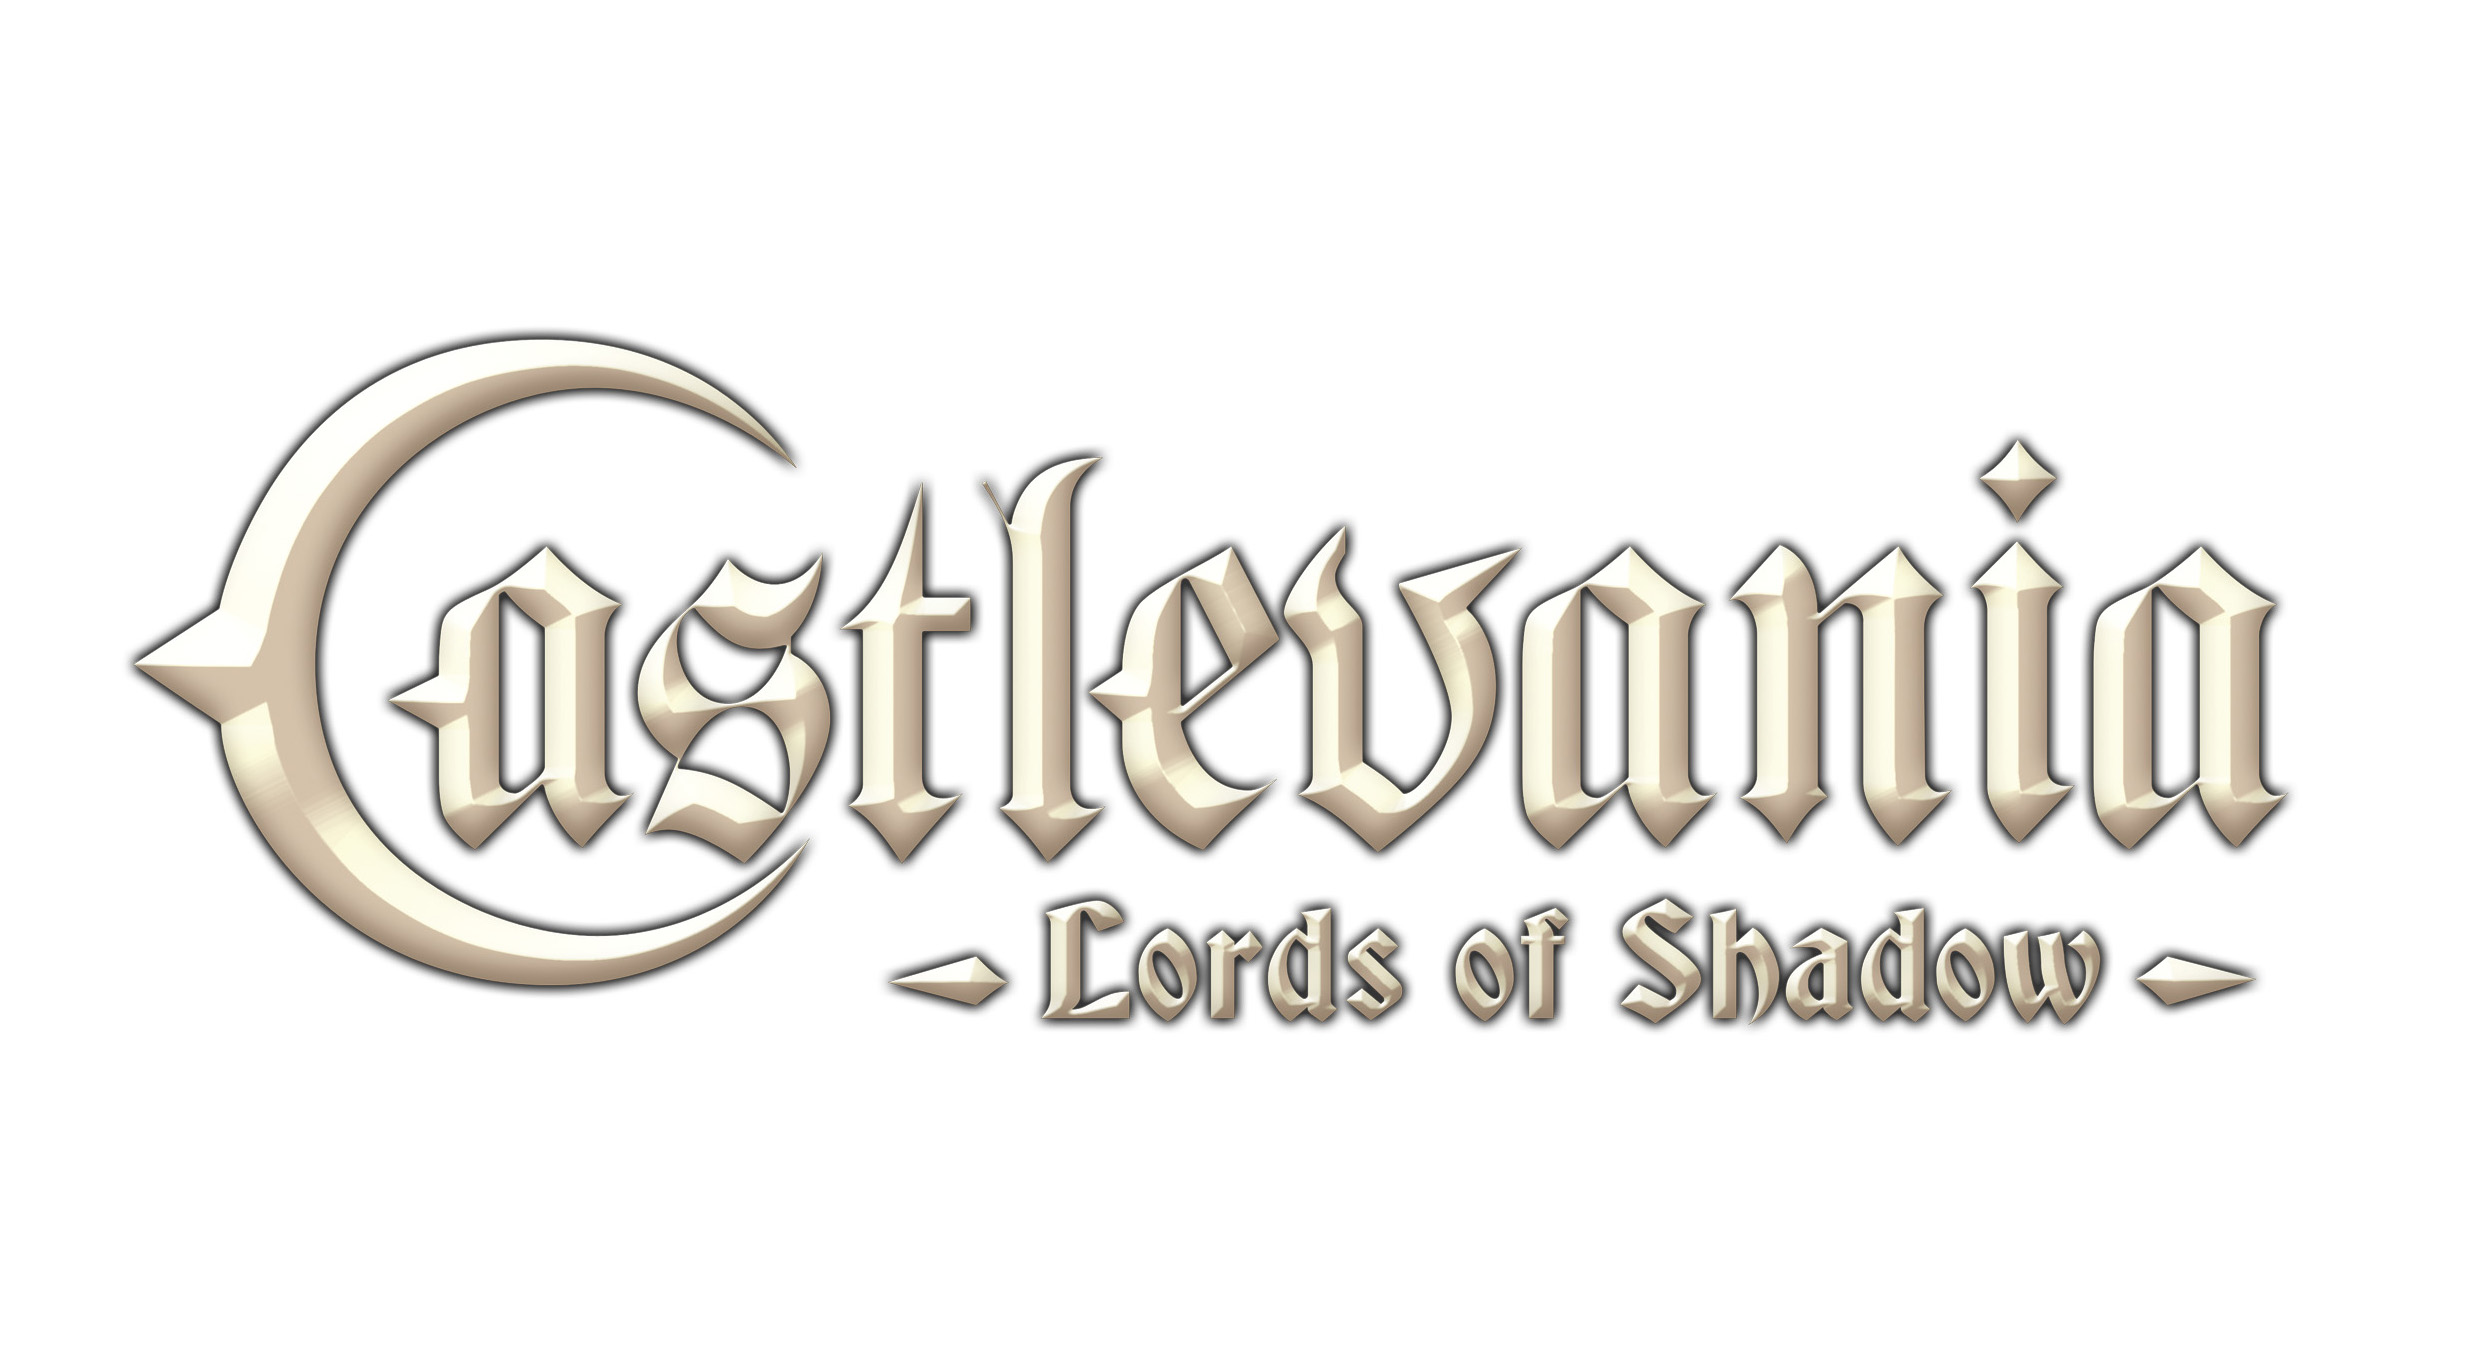 Castlevania lords of shadow steam фото 23